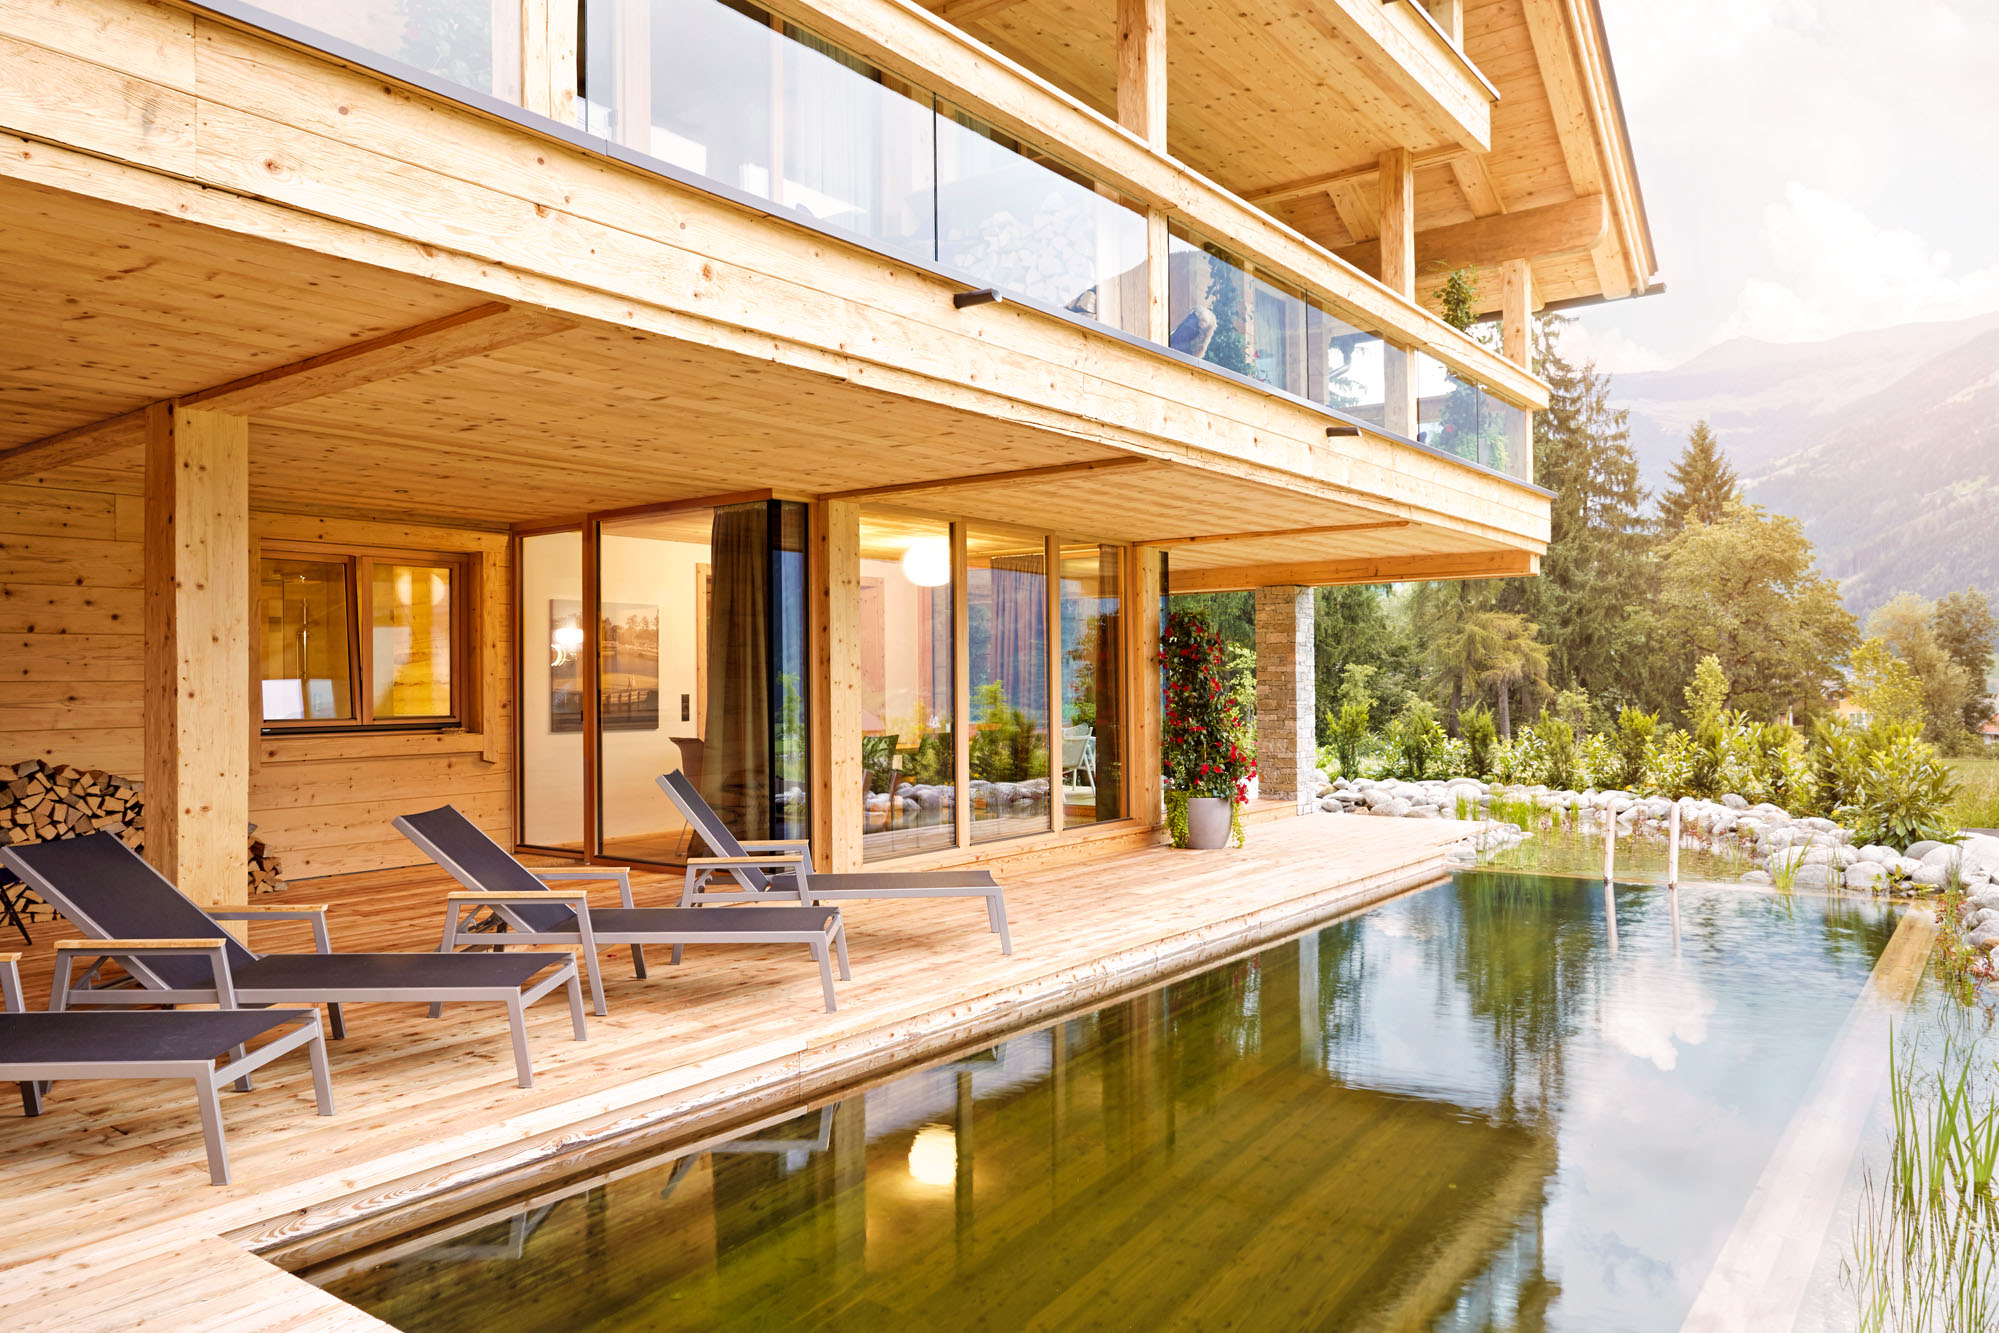 Experience “healing through wood” at Austria's Ecolabel-EU-certified, all-local-wood ZillerLodge